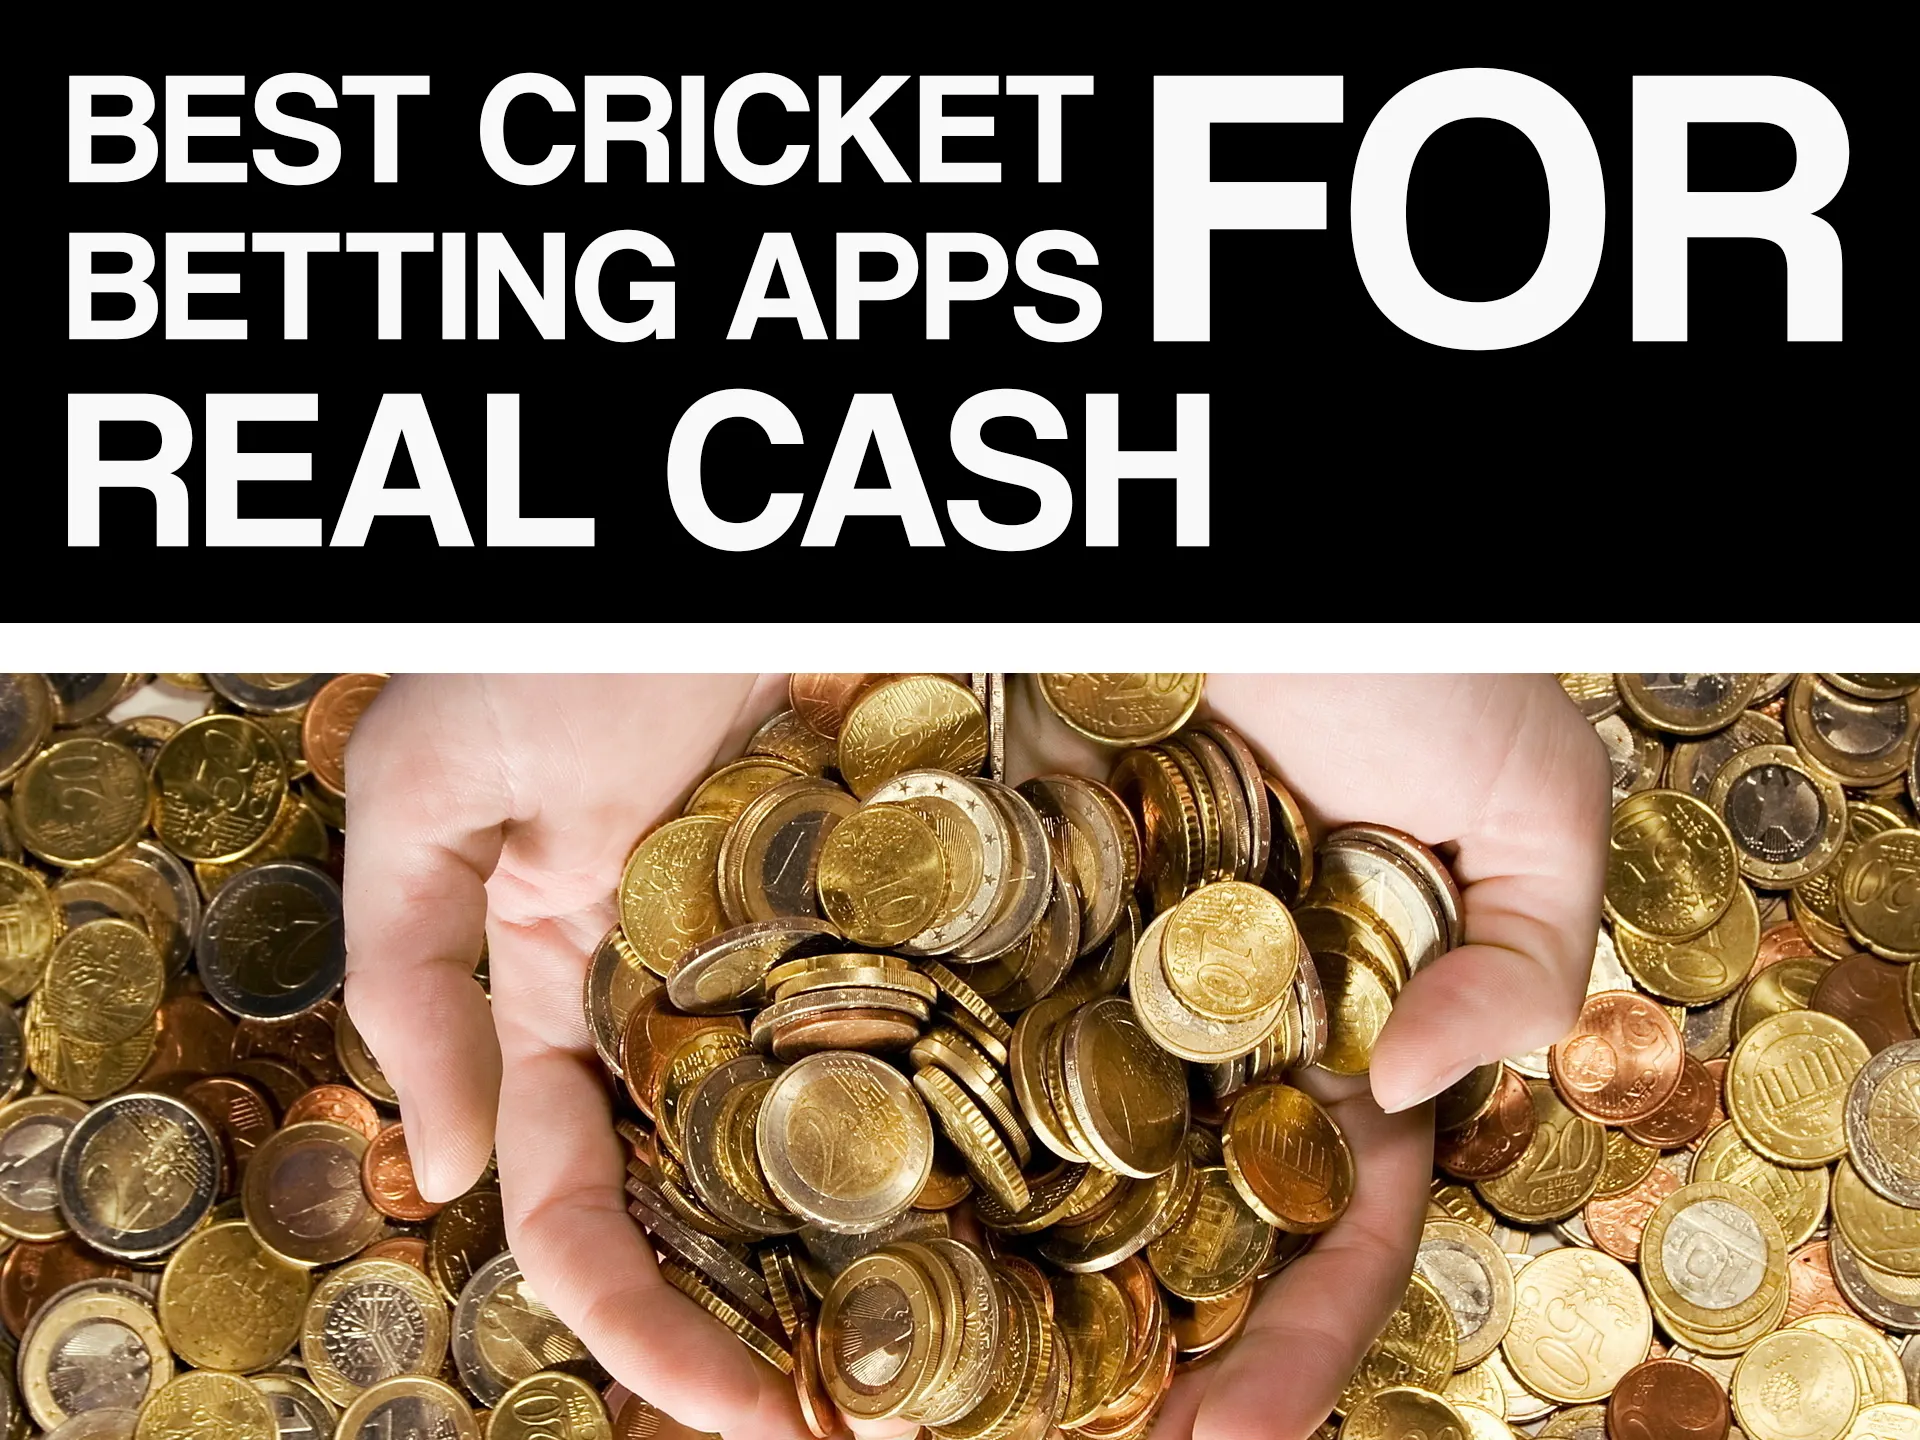 Use real cash for making bets in apps.